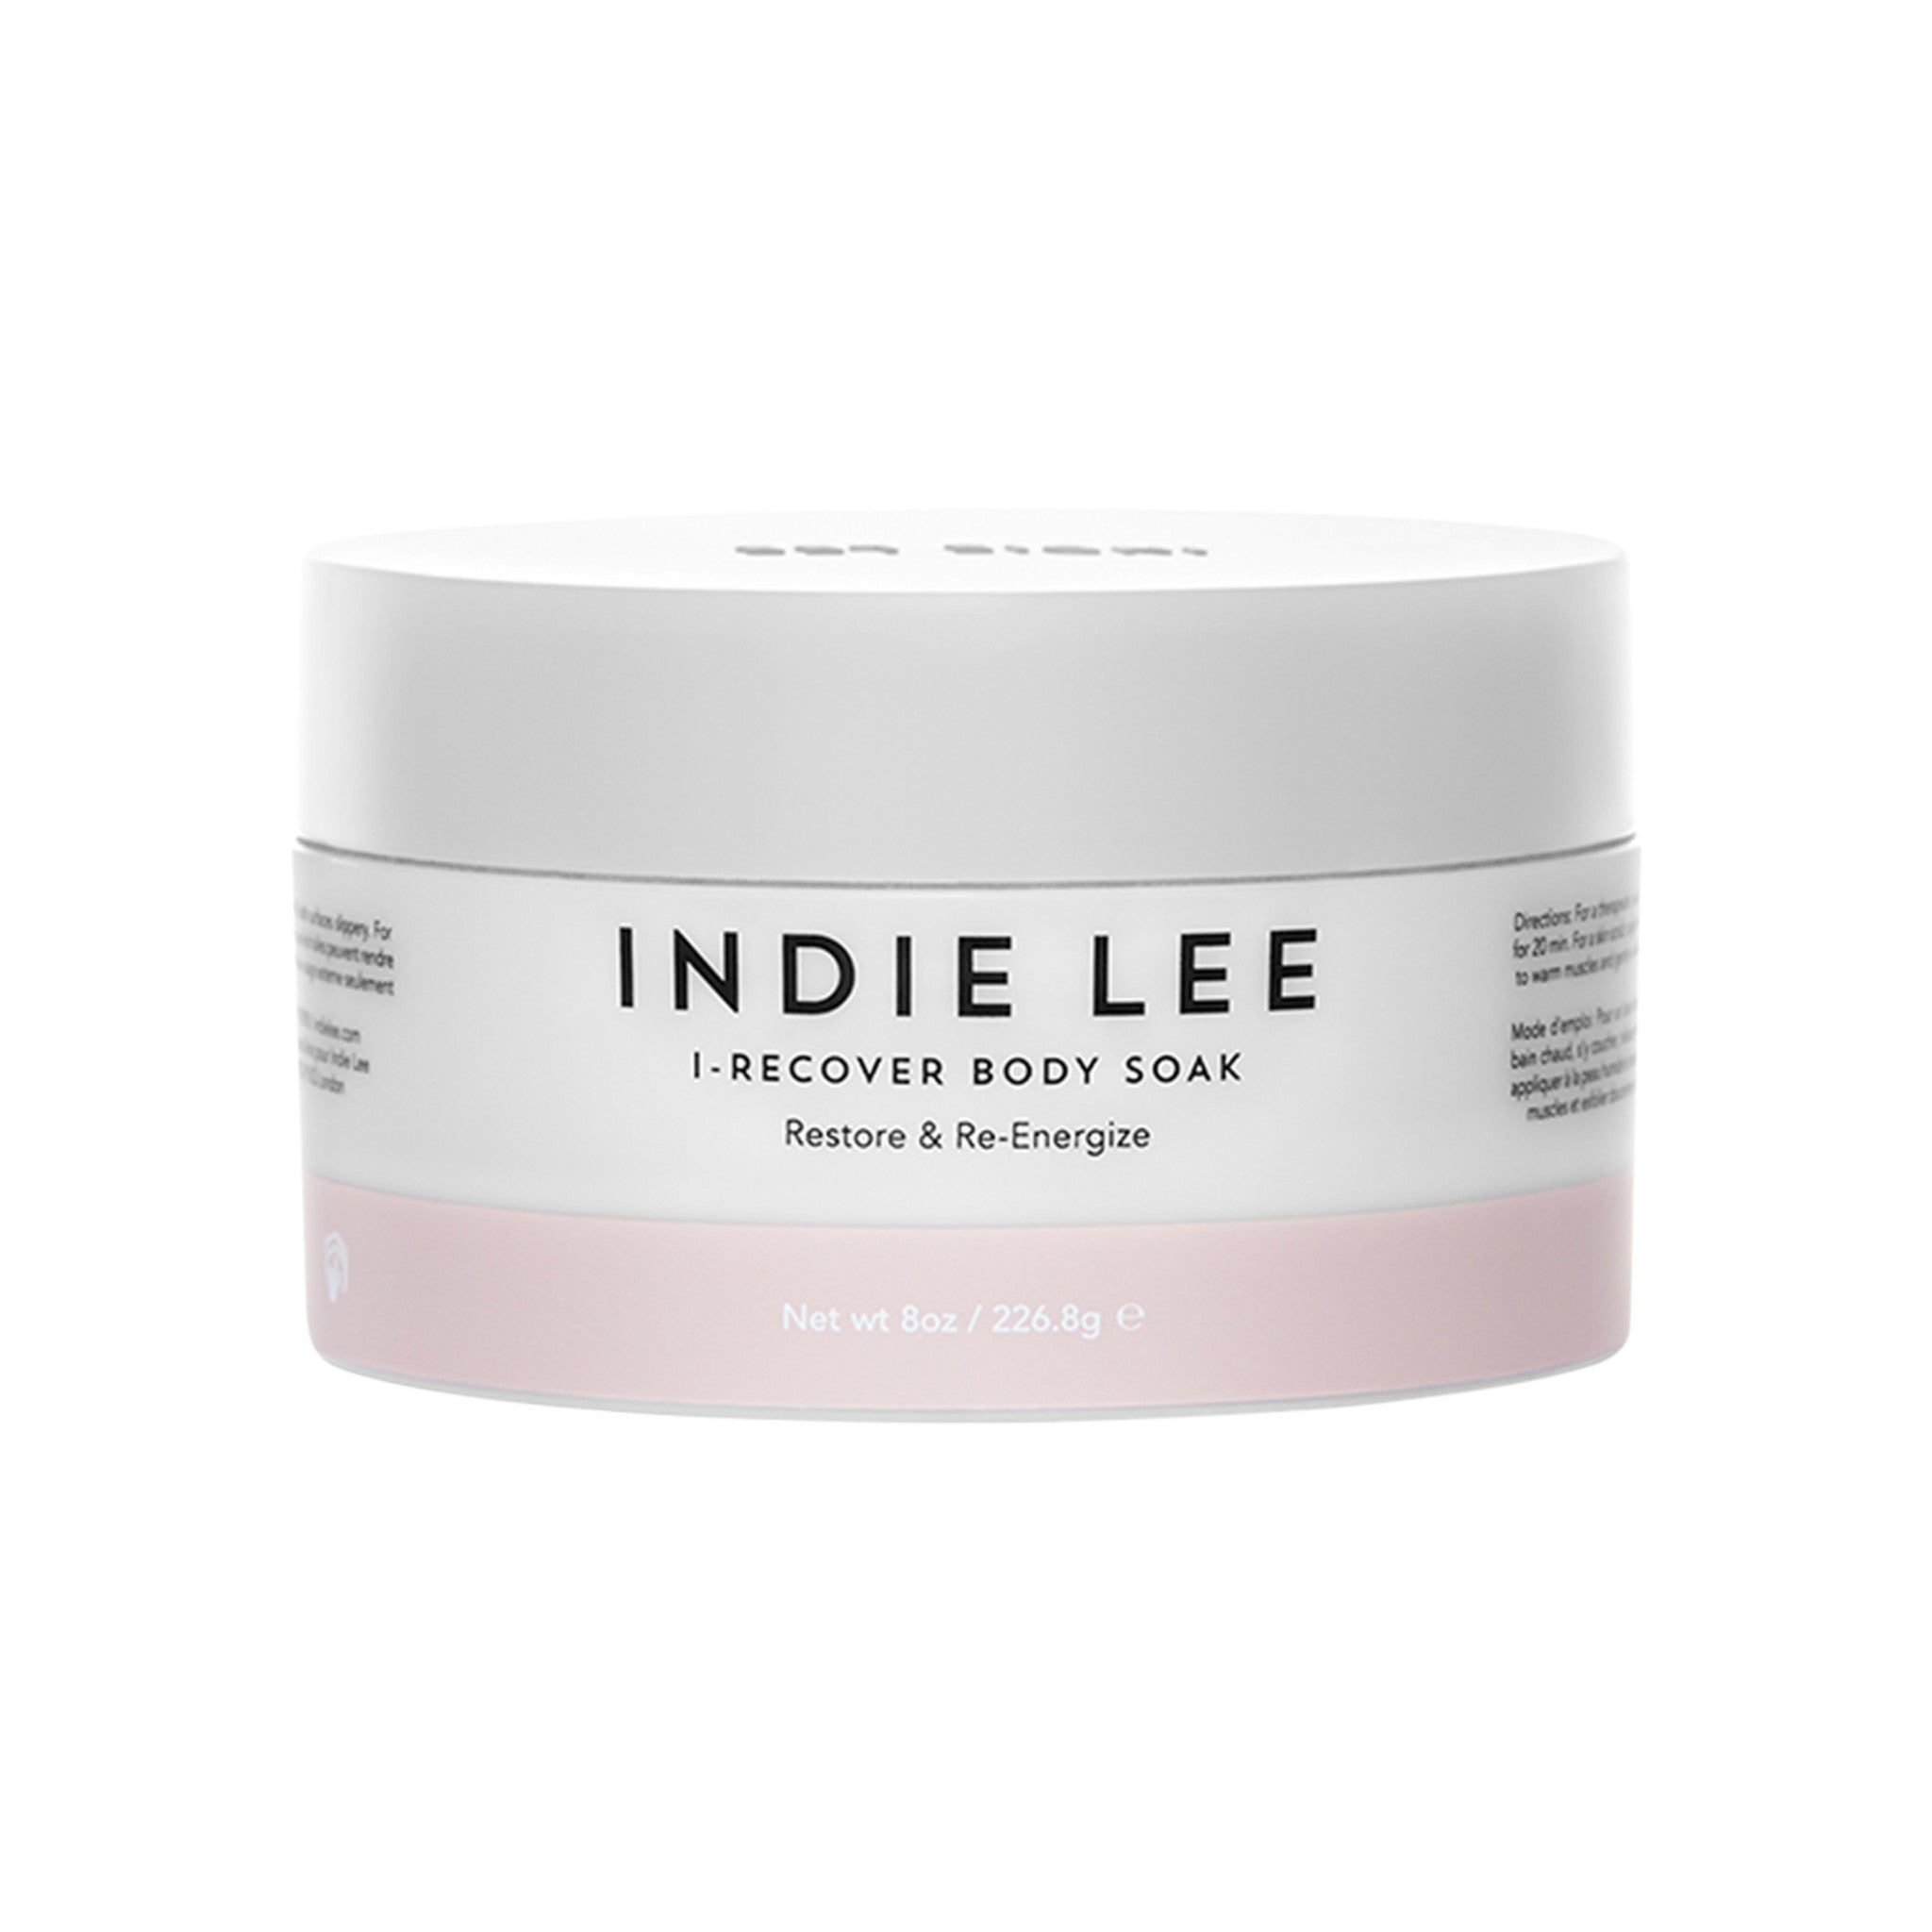 Indie Lee I-Recover Body Soak main image.